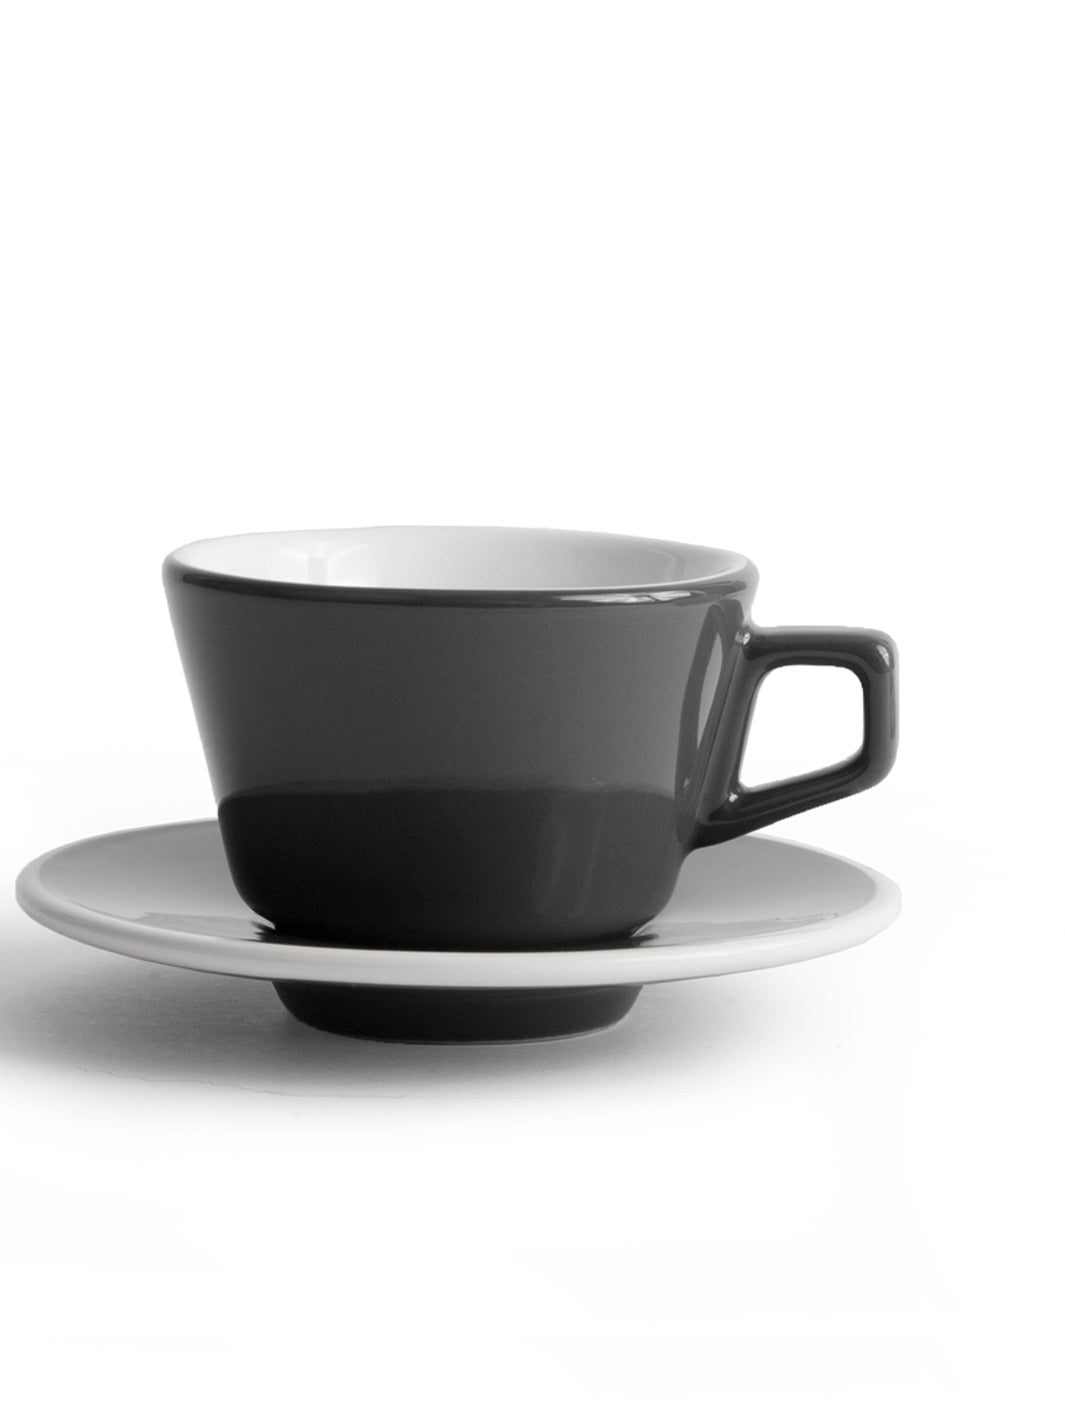 CREATED CO. Angle Espresso Saucer (Saucer Only)